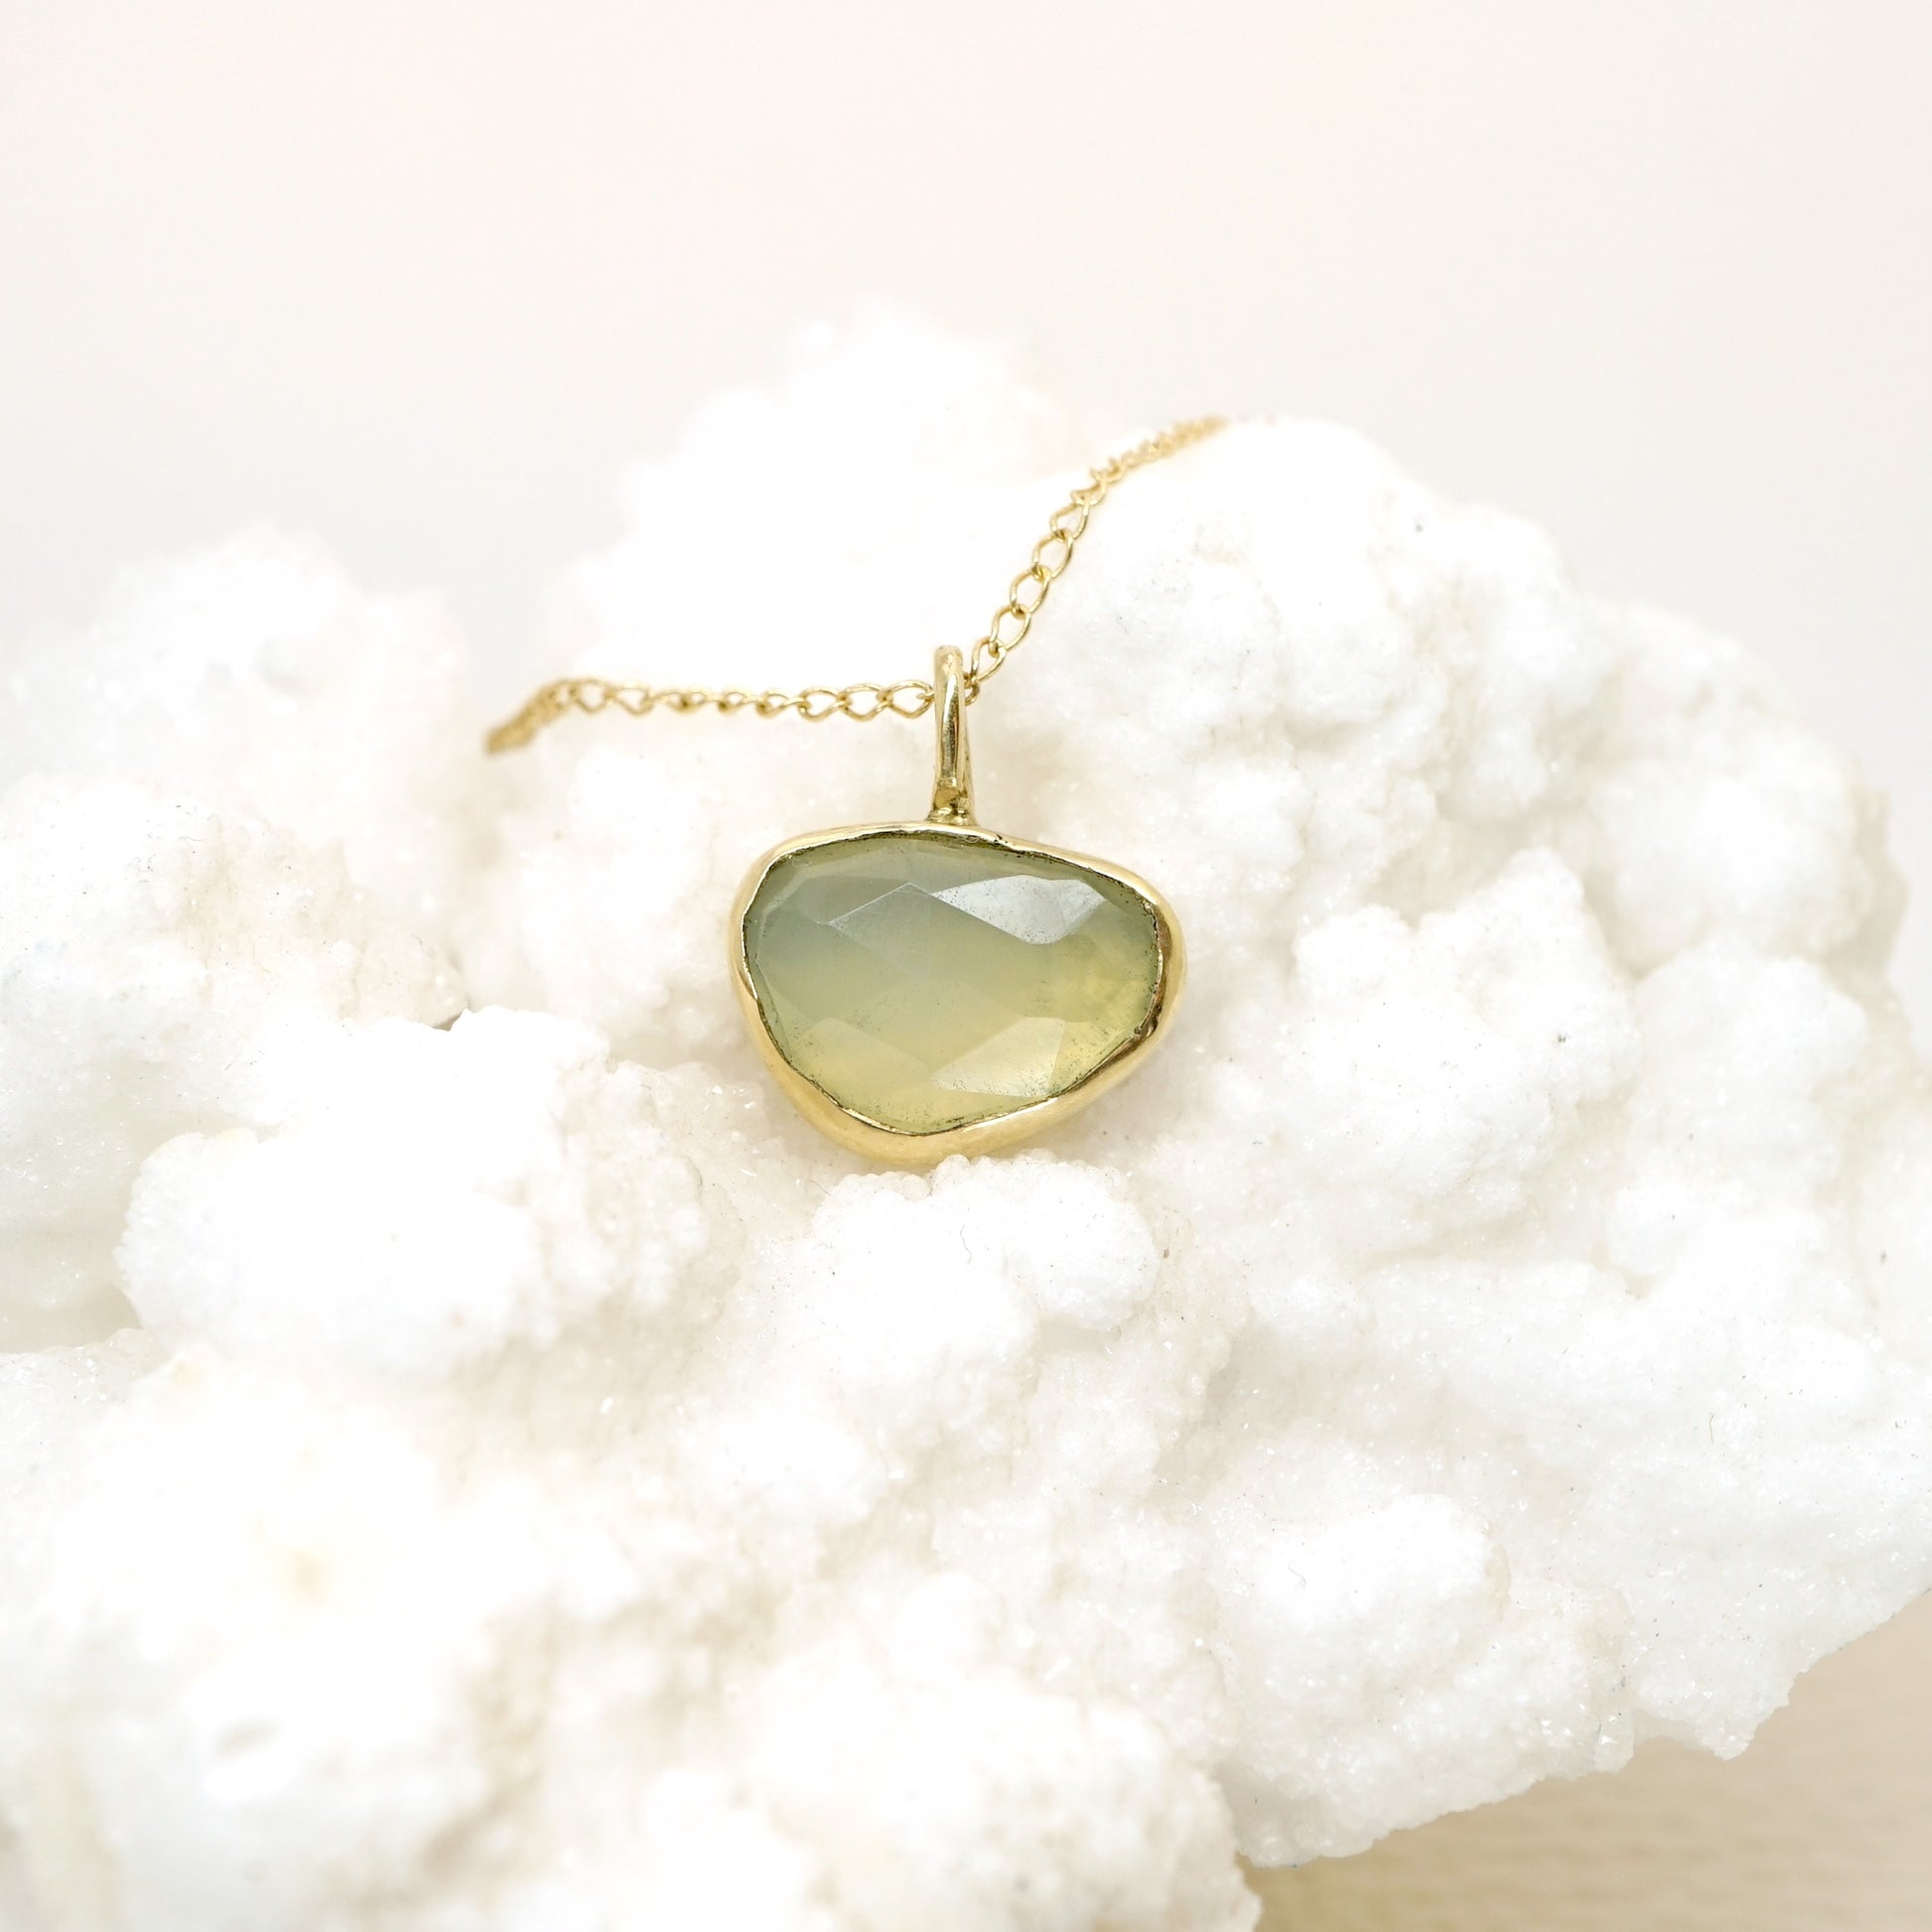 Chalcedony Pendant Necklace in 14k Gold